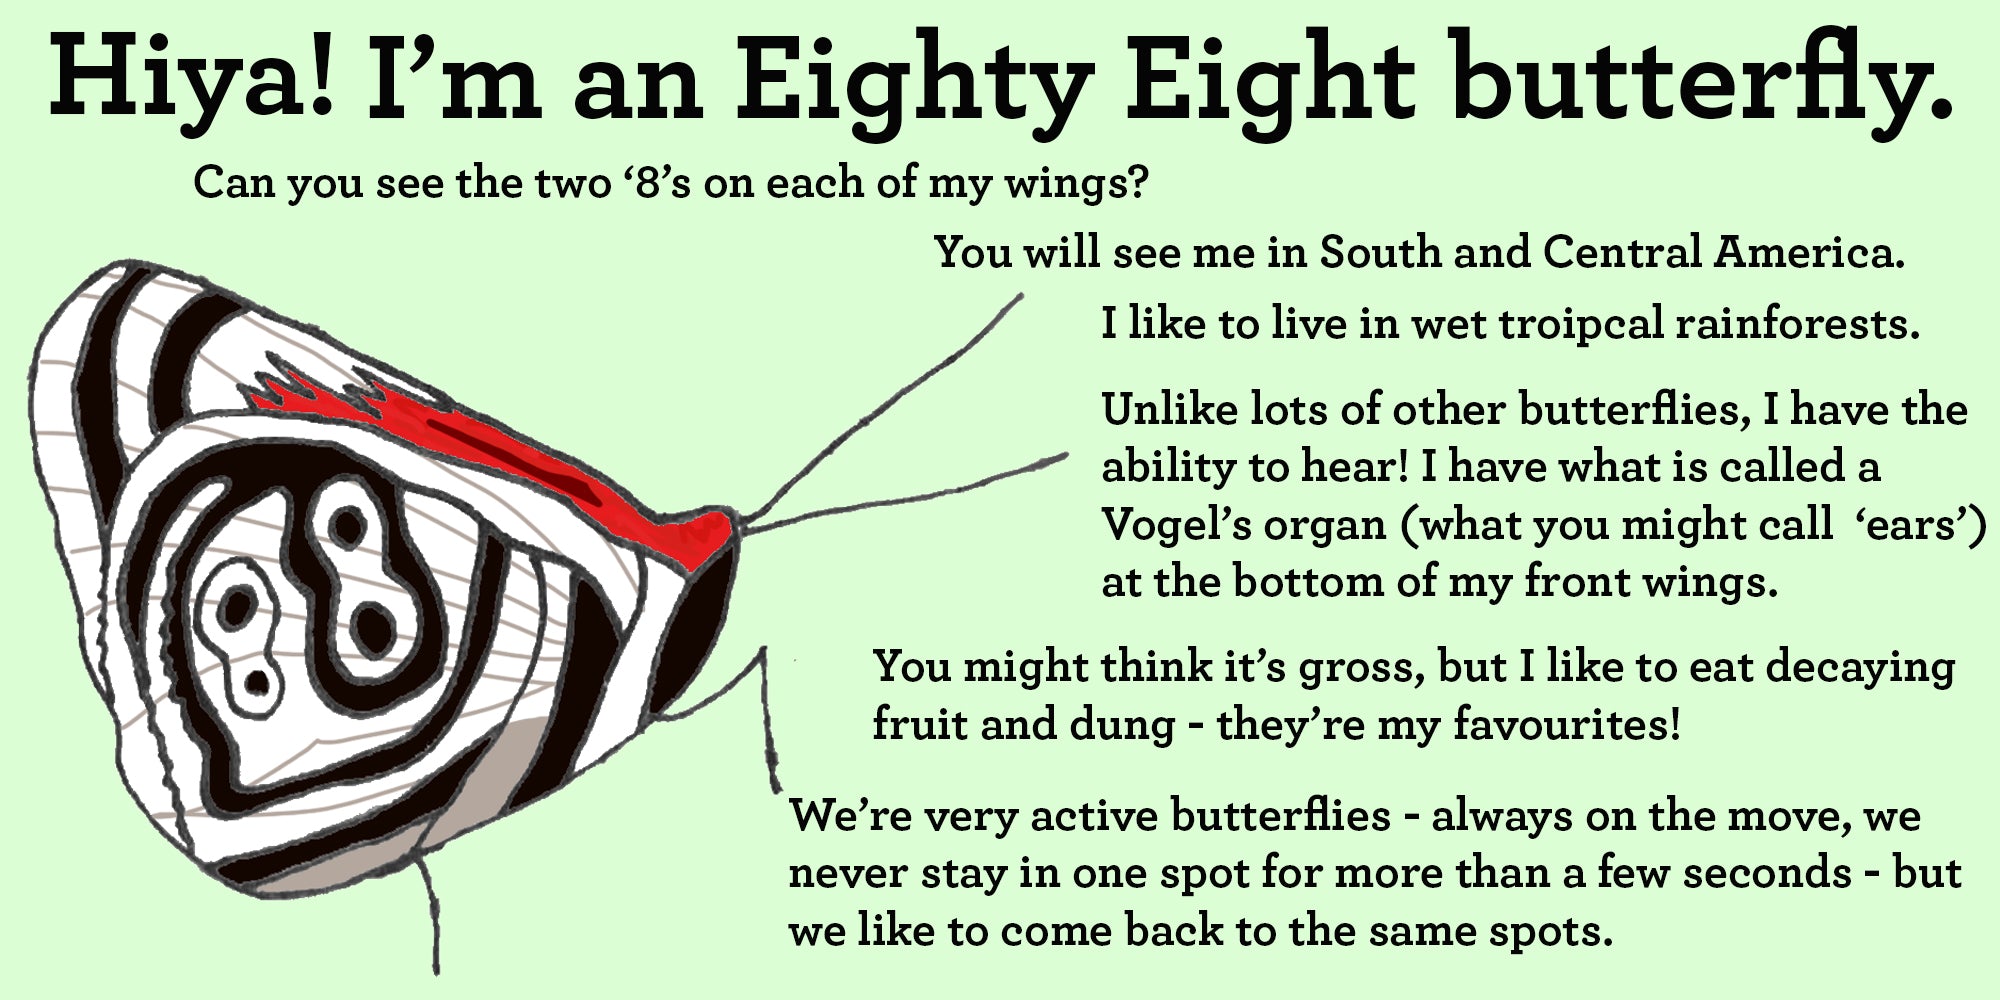 eighty wight butterfly facts 